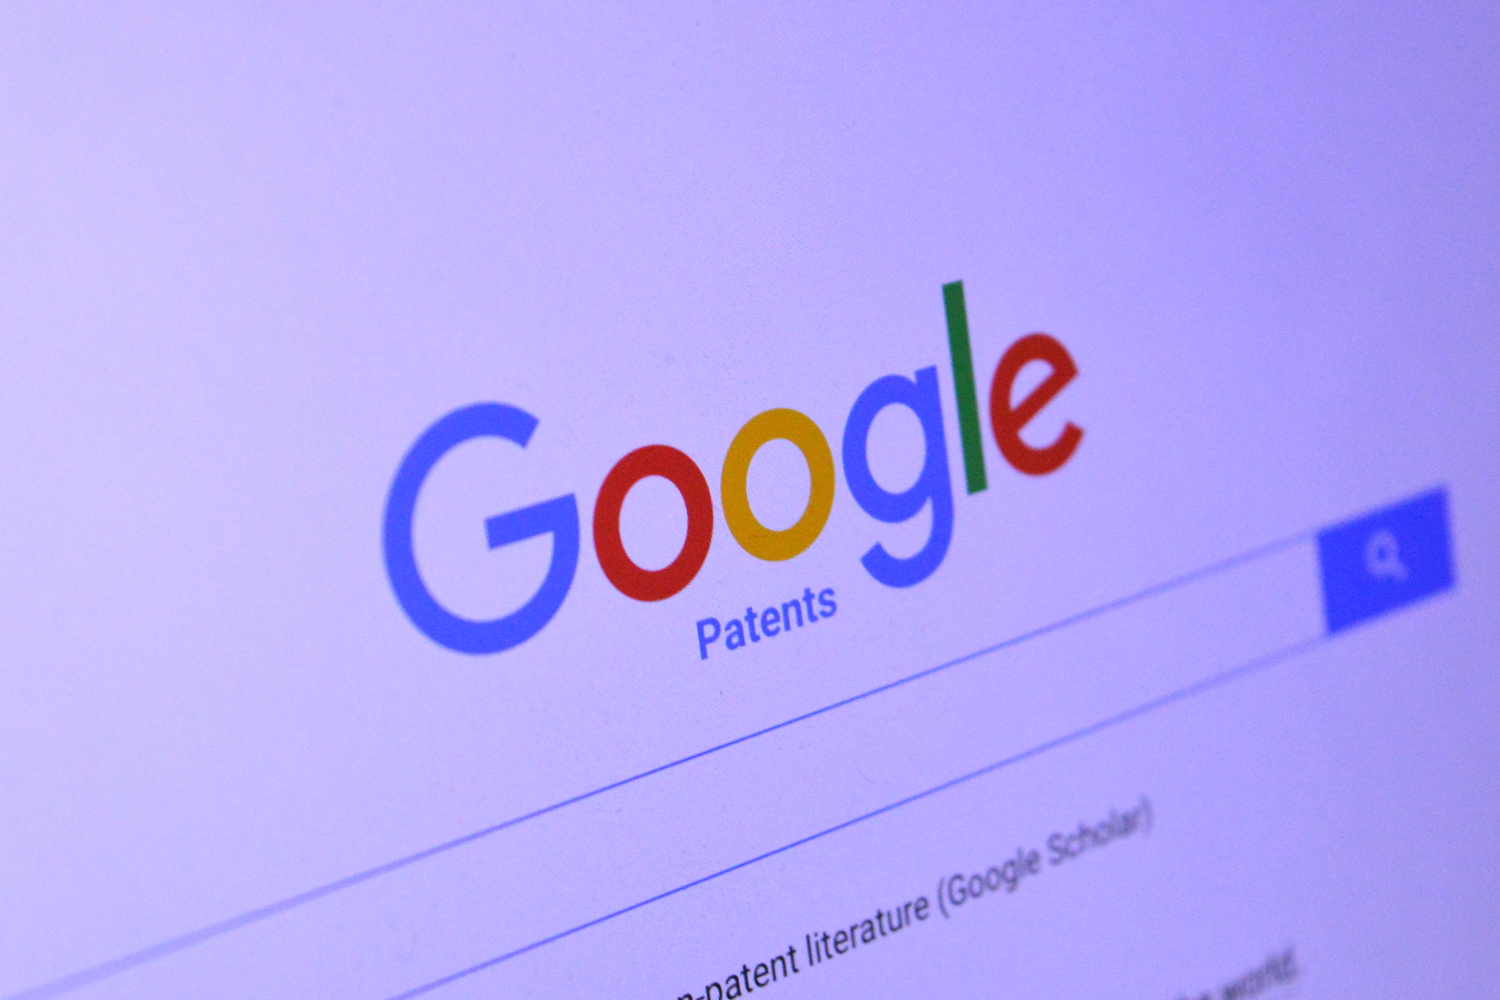 google patents expansion 11 countries